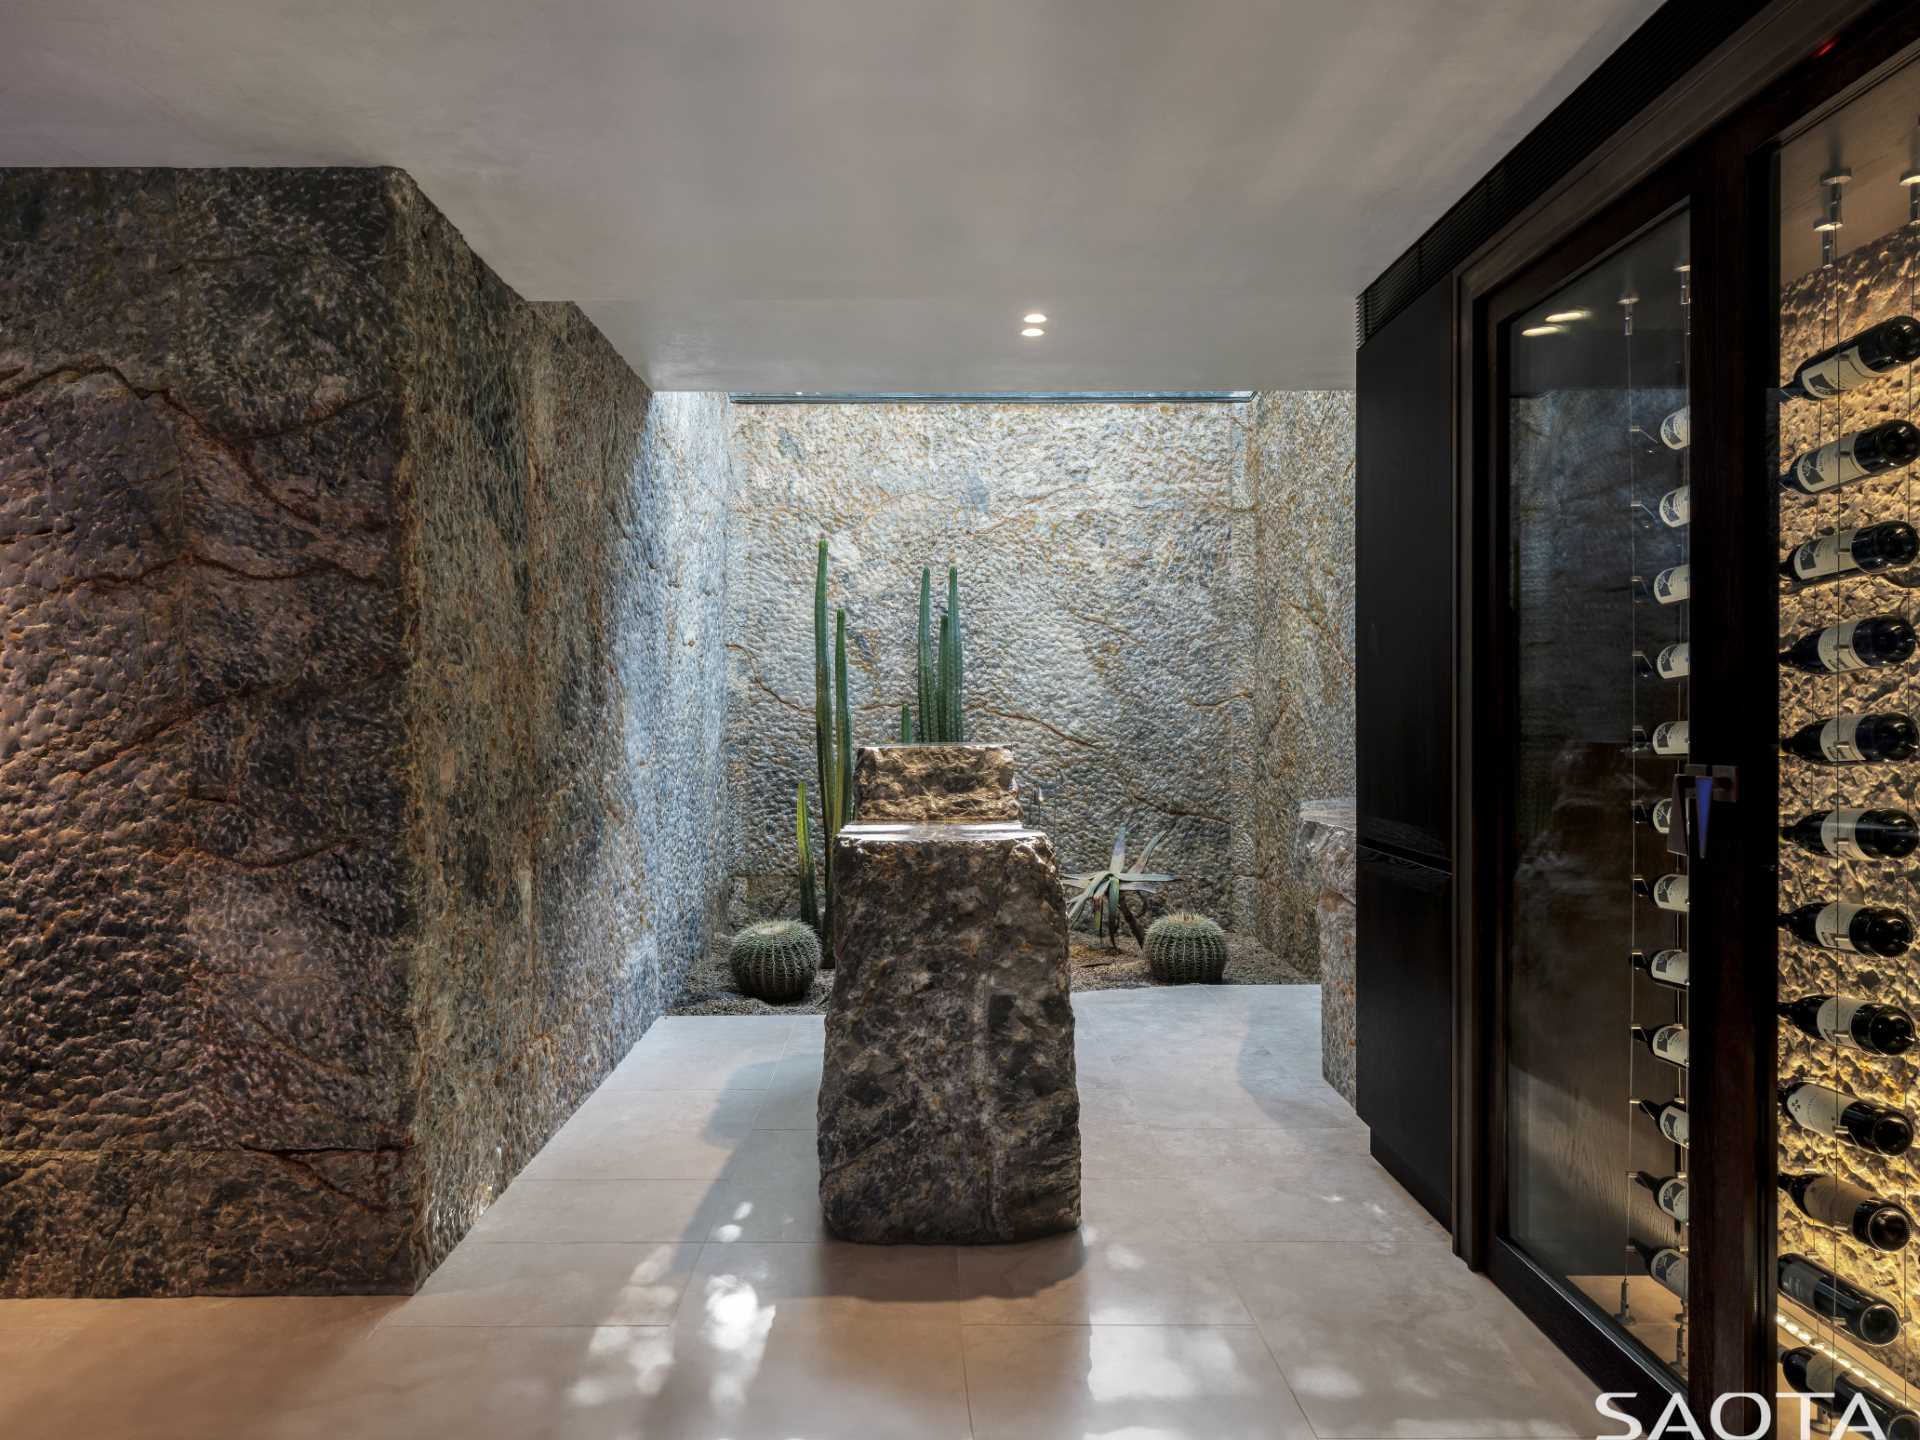 Stone walls create a dramatic statement in the cellar.